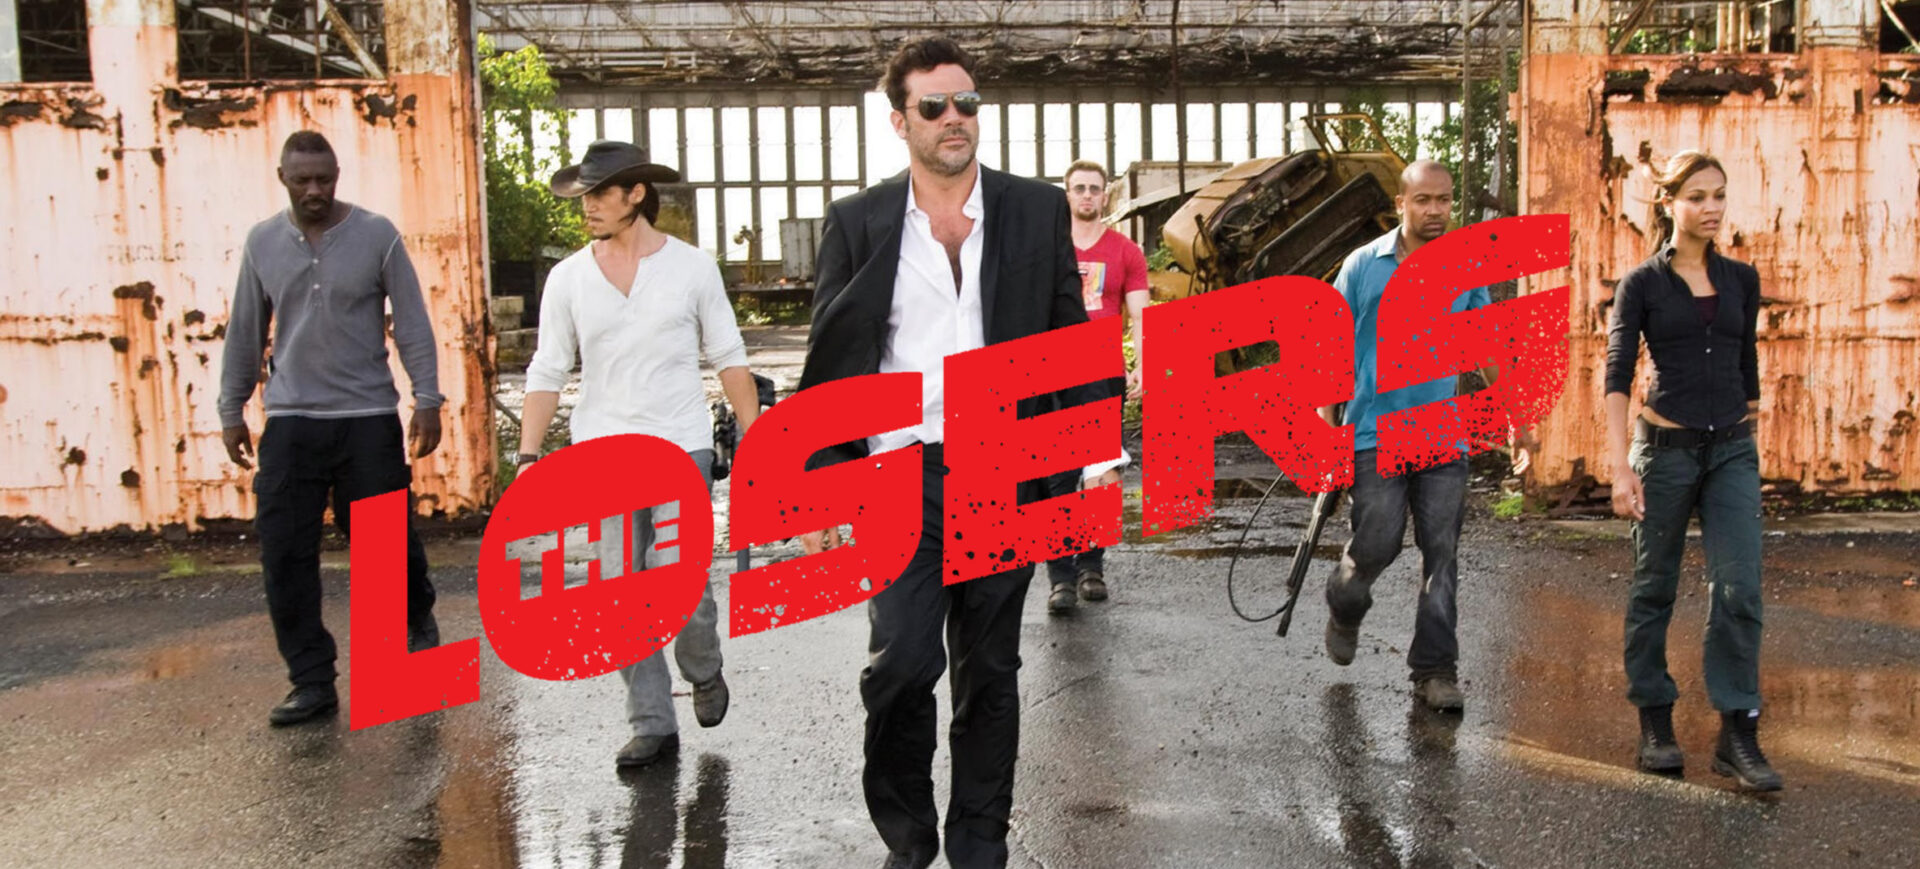 the losers 2 banner